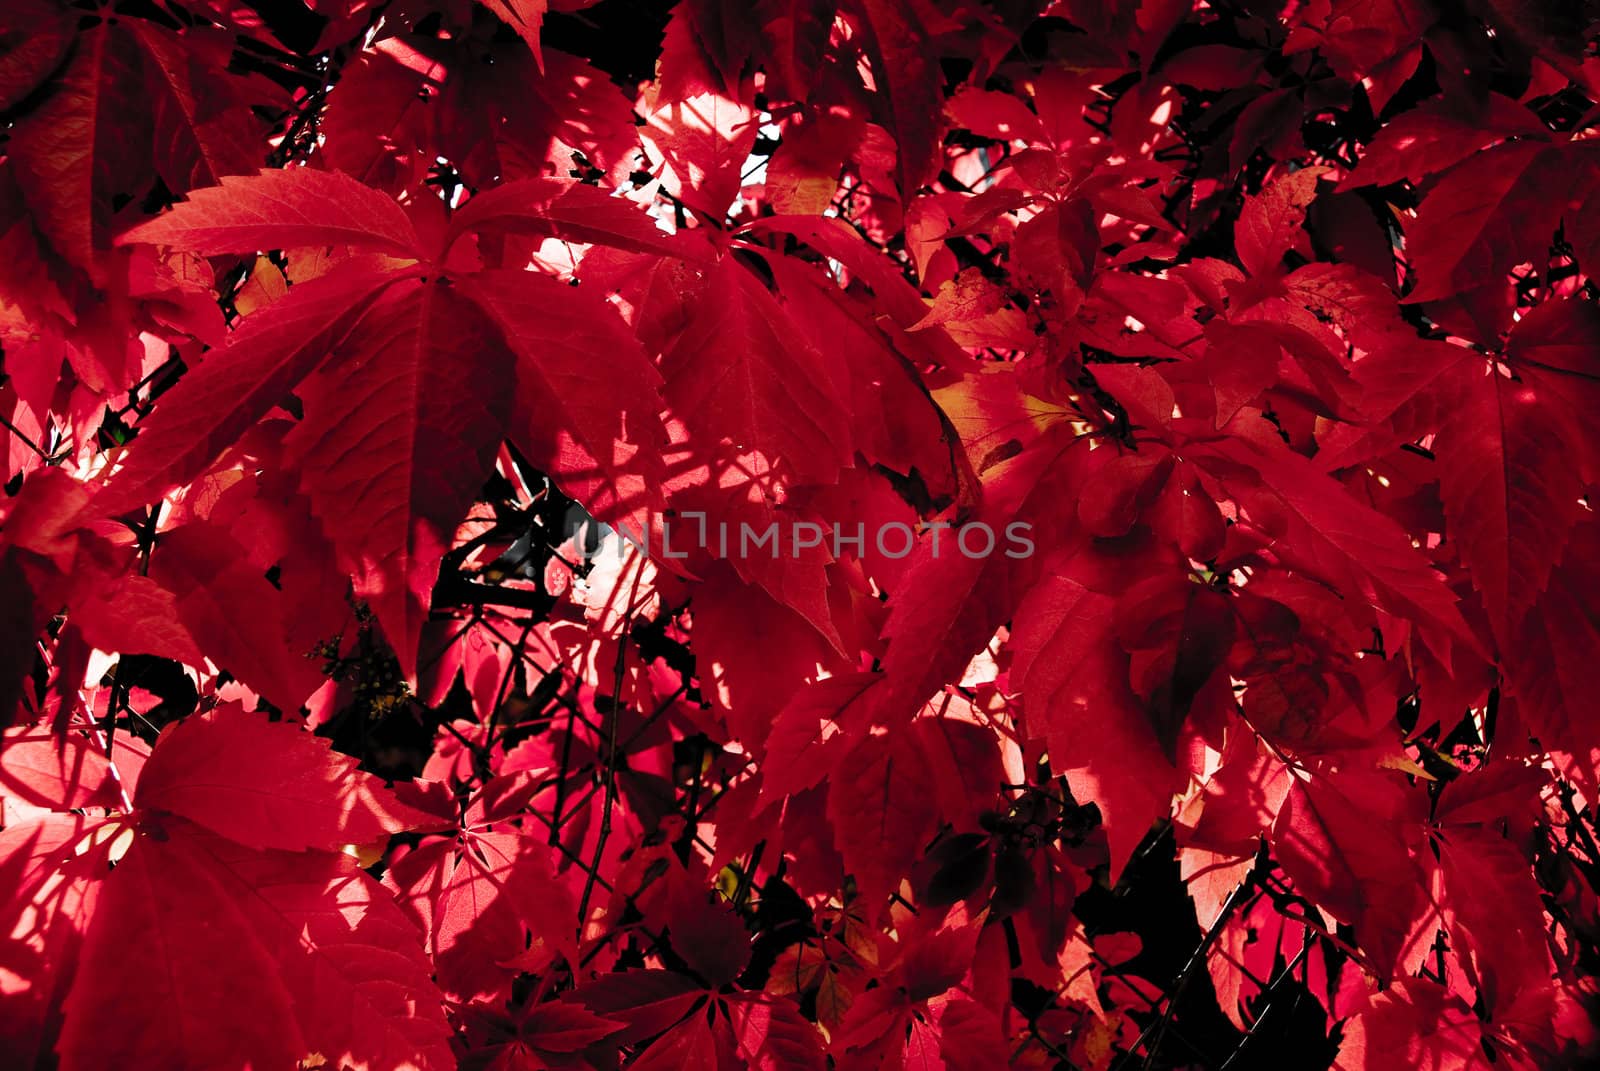 A wall of red, autums leafs. Strong red color.